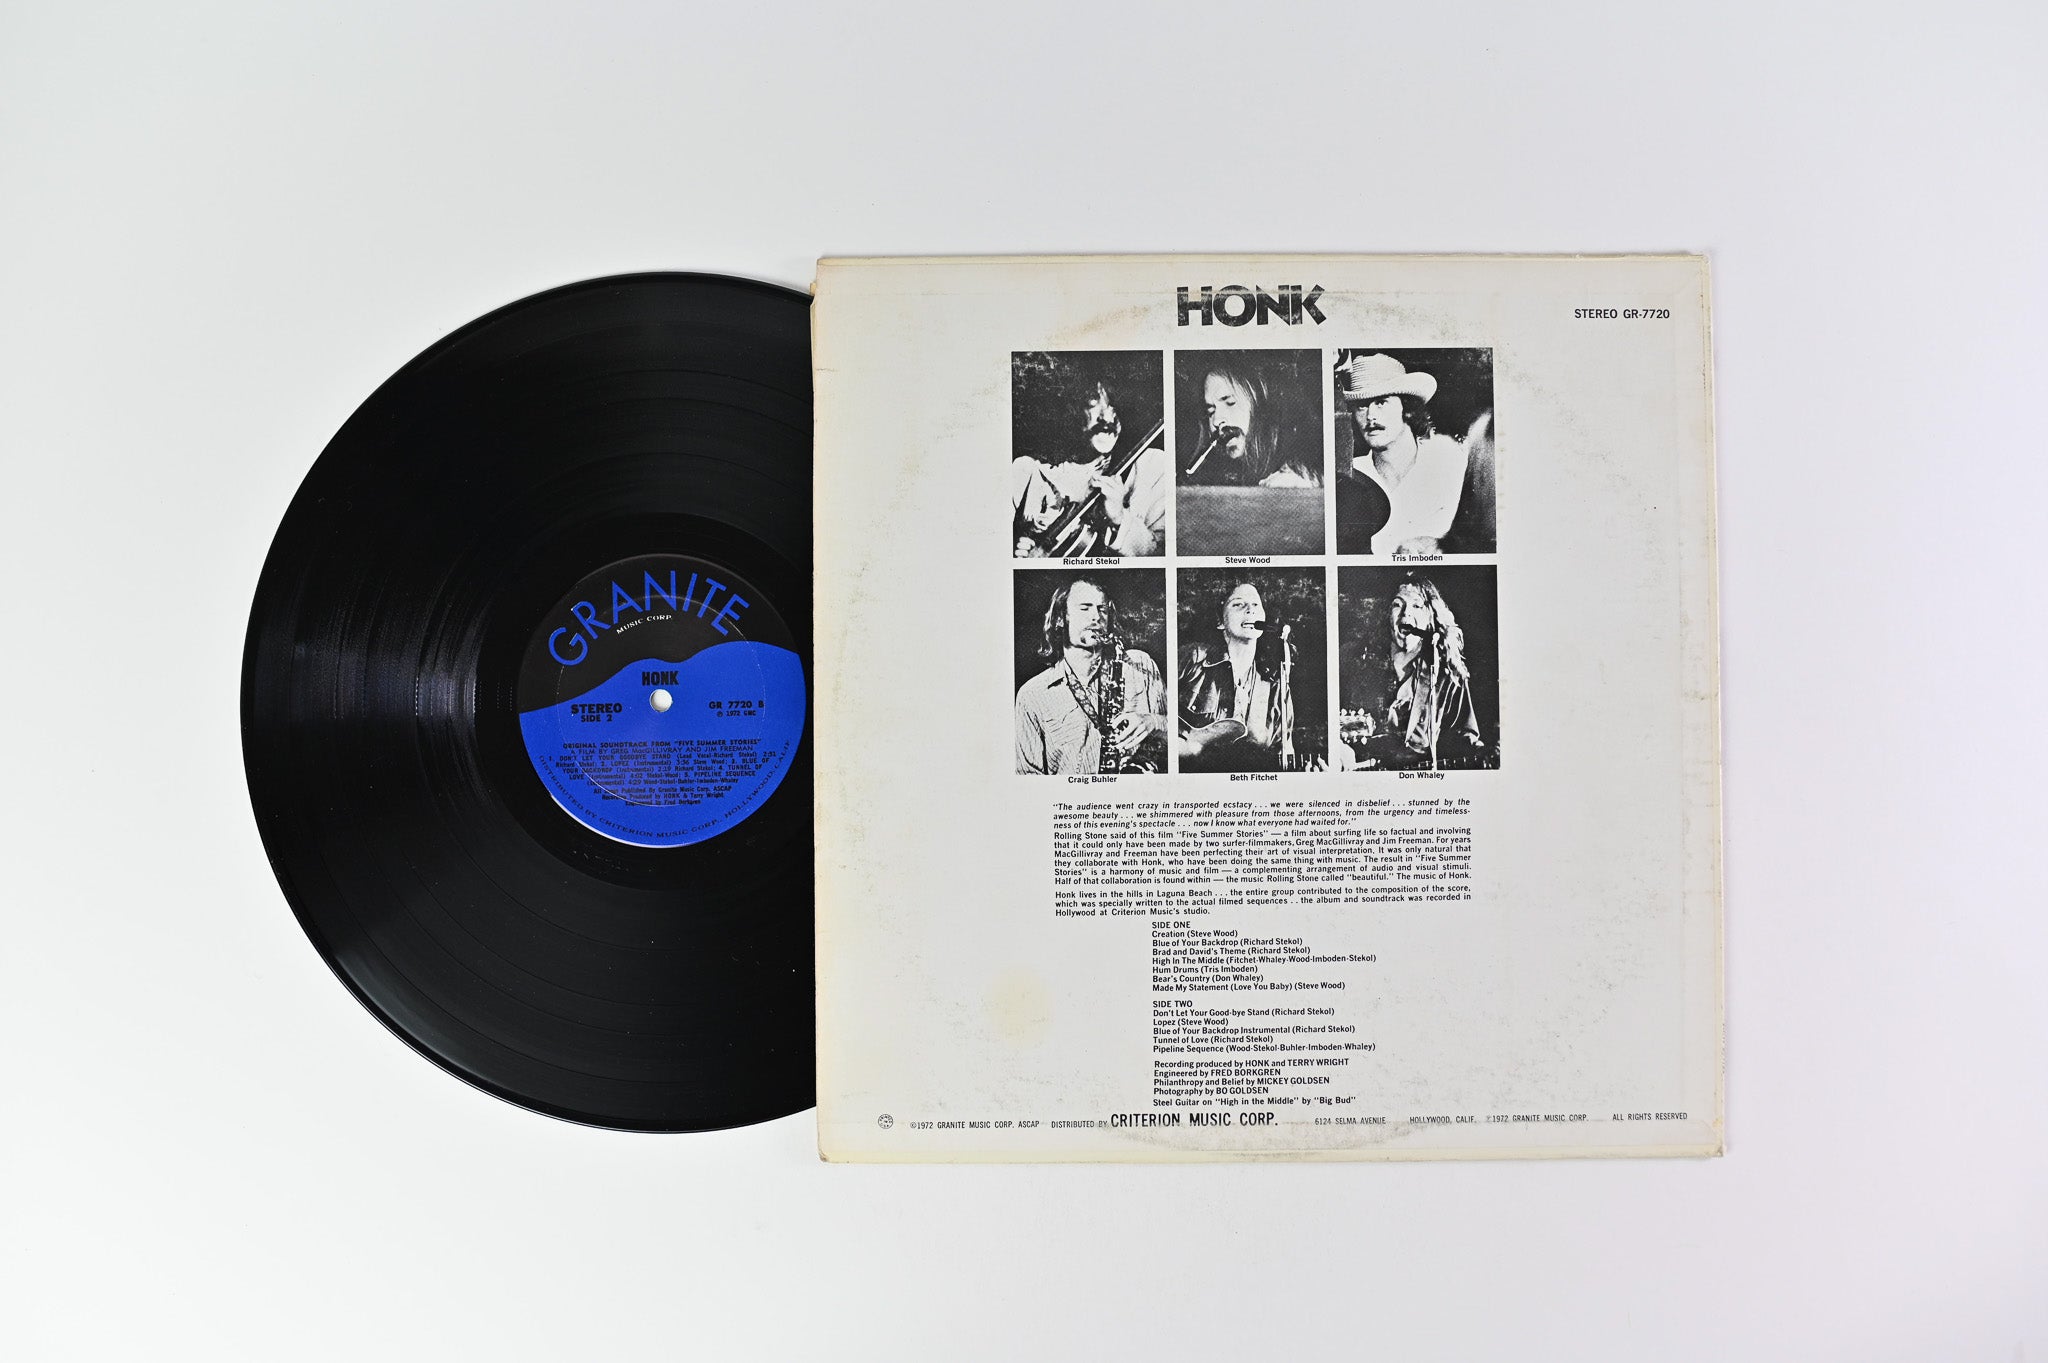 Honk - The Original Sound Track from Five Summer Stories on Granite Records